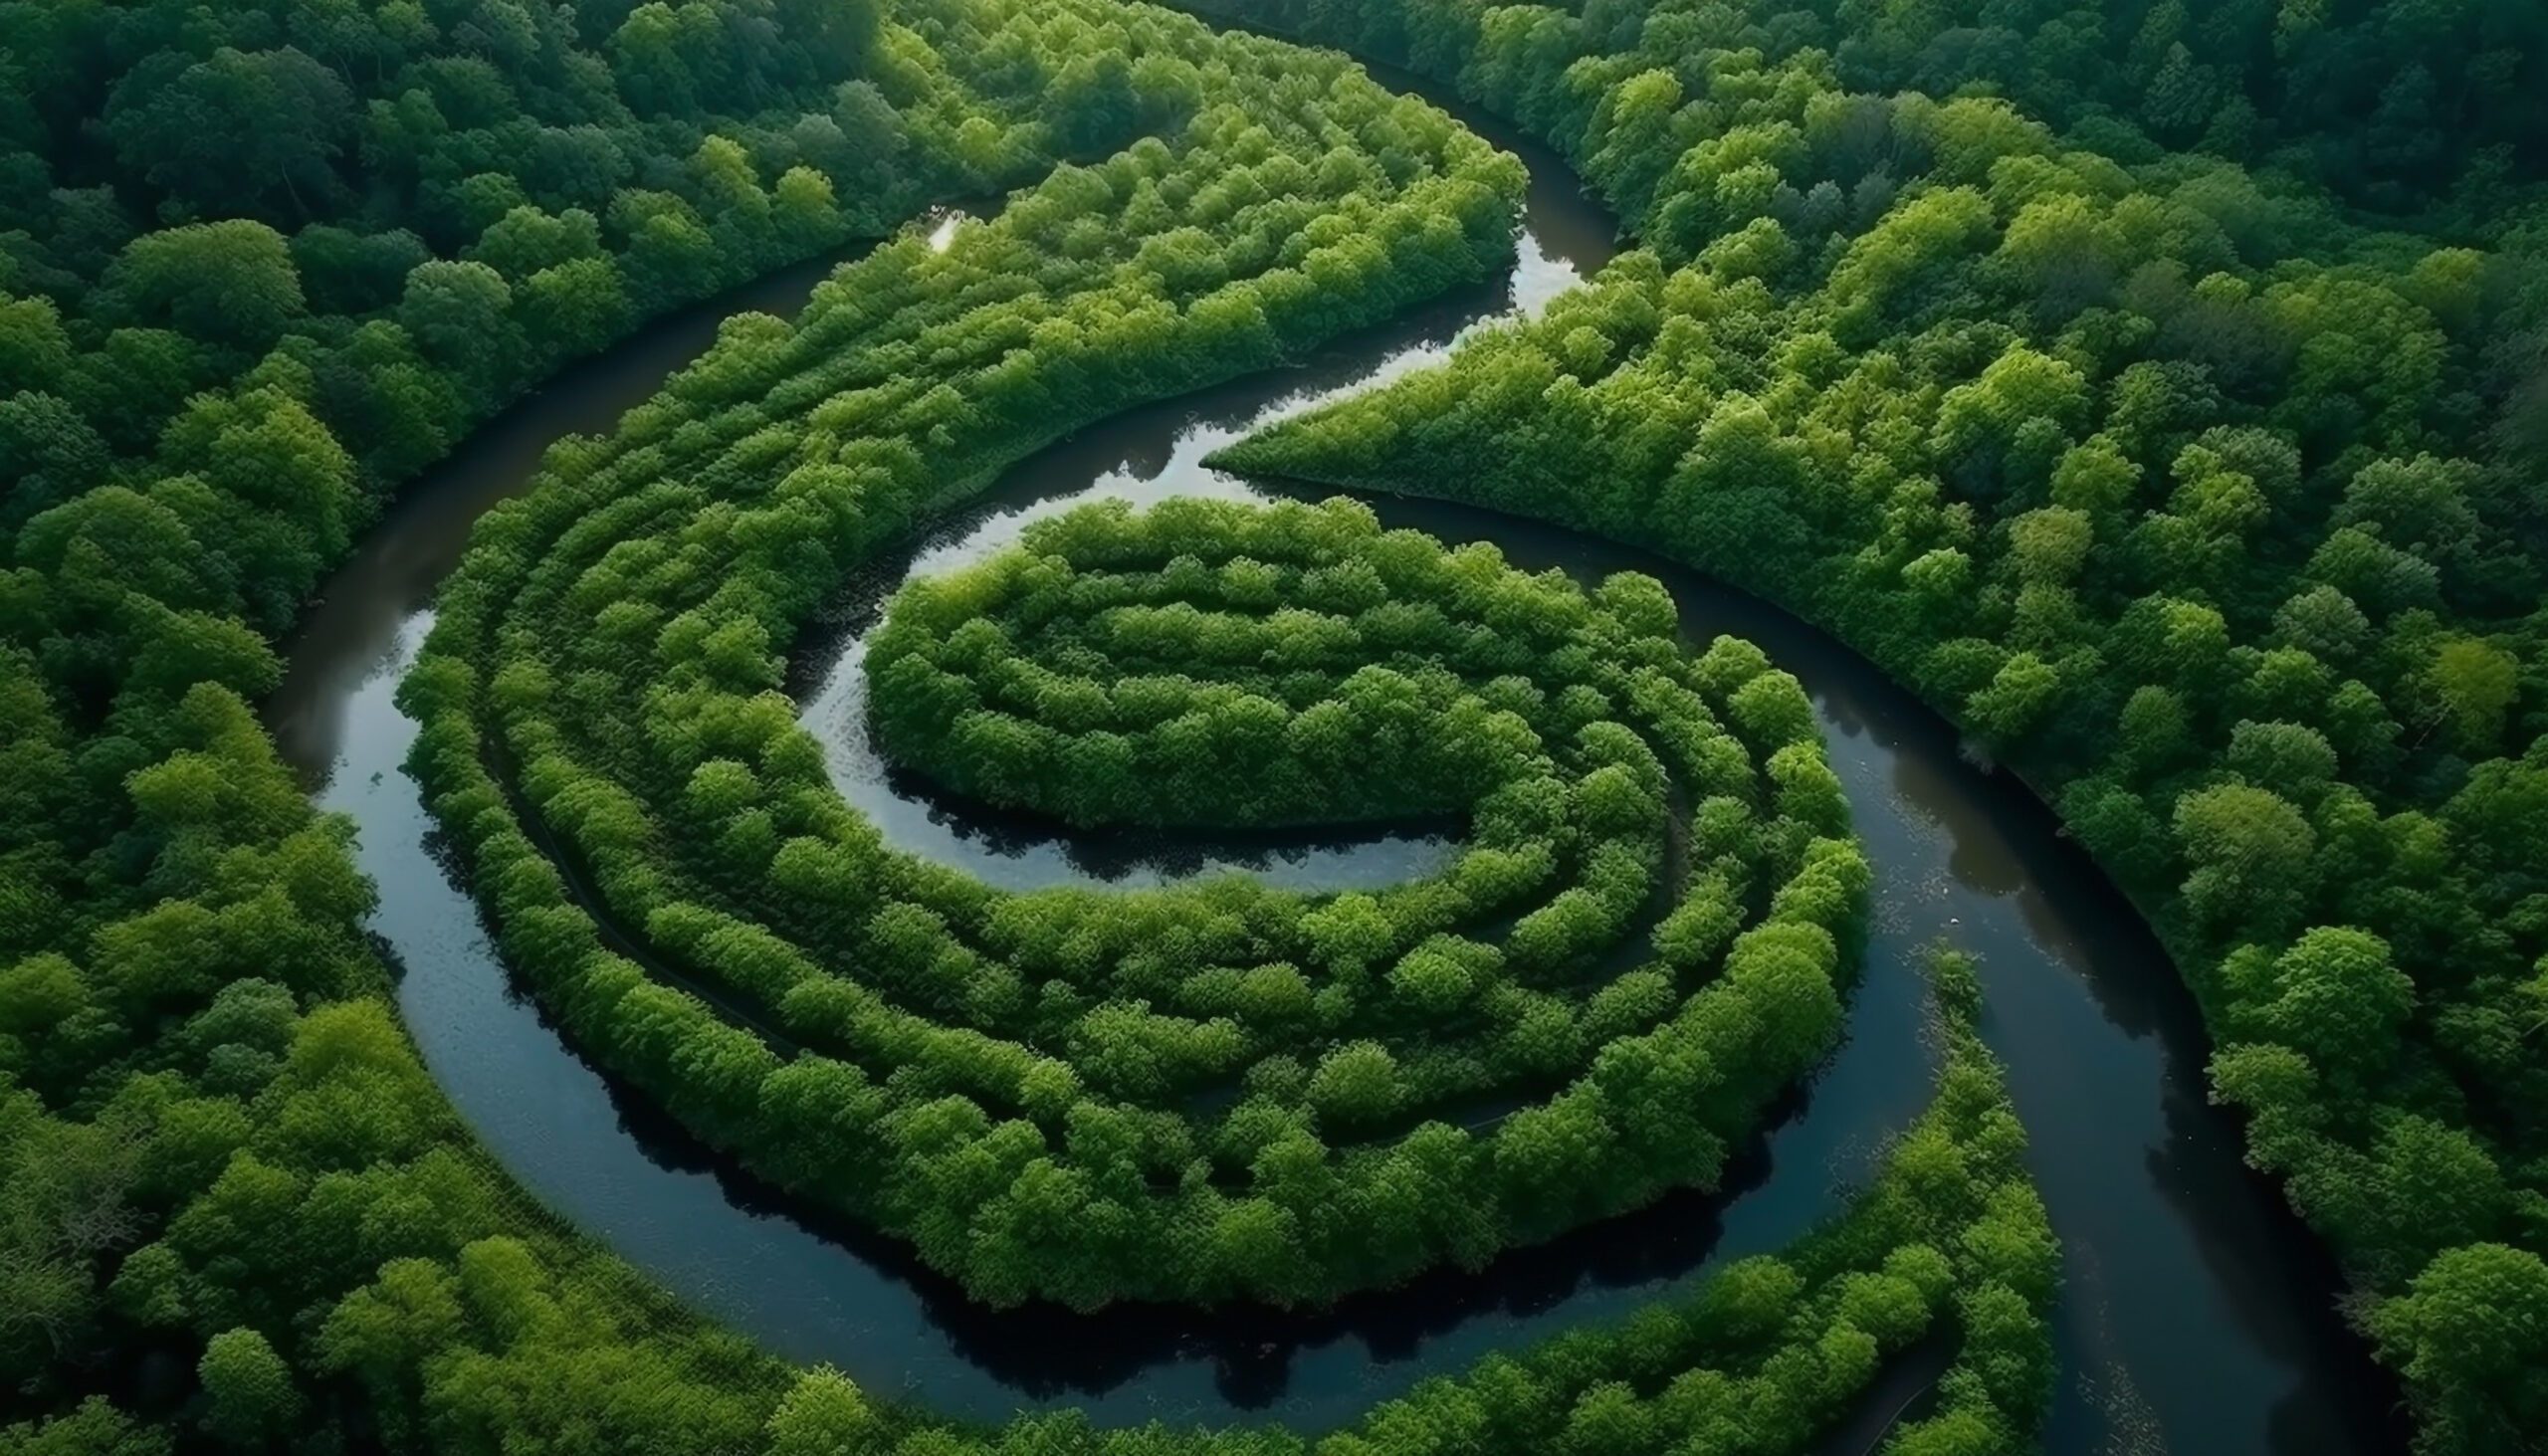 maze trees is surrounded by green vegetation scaled